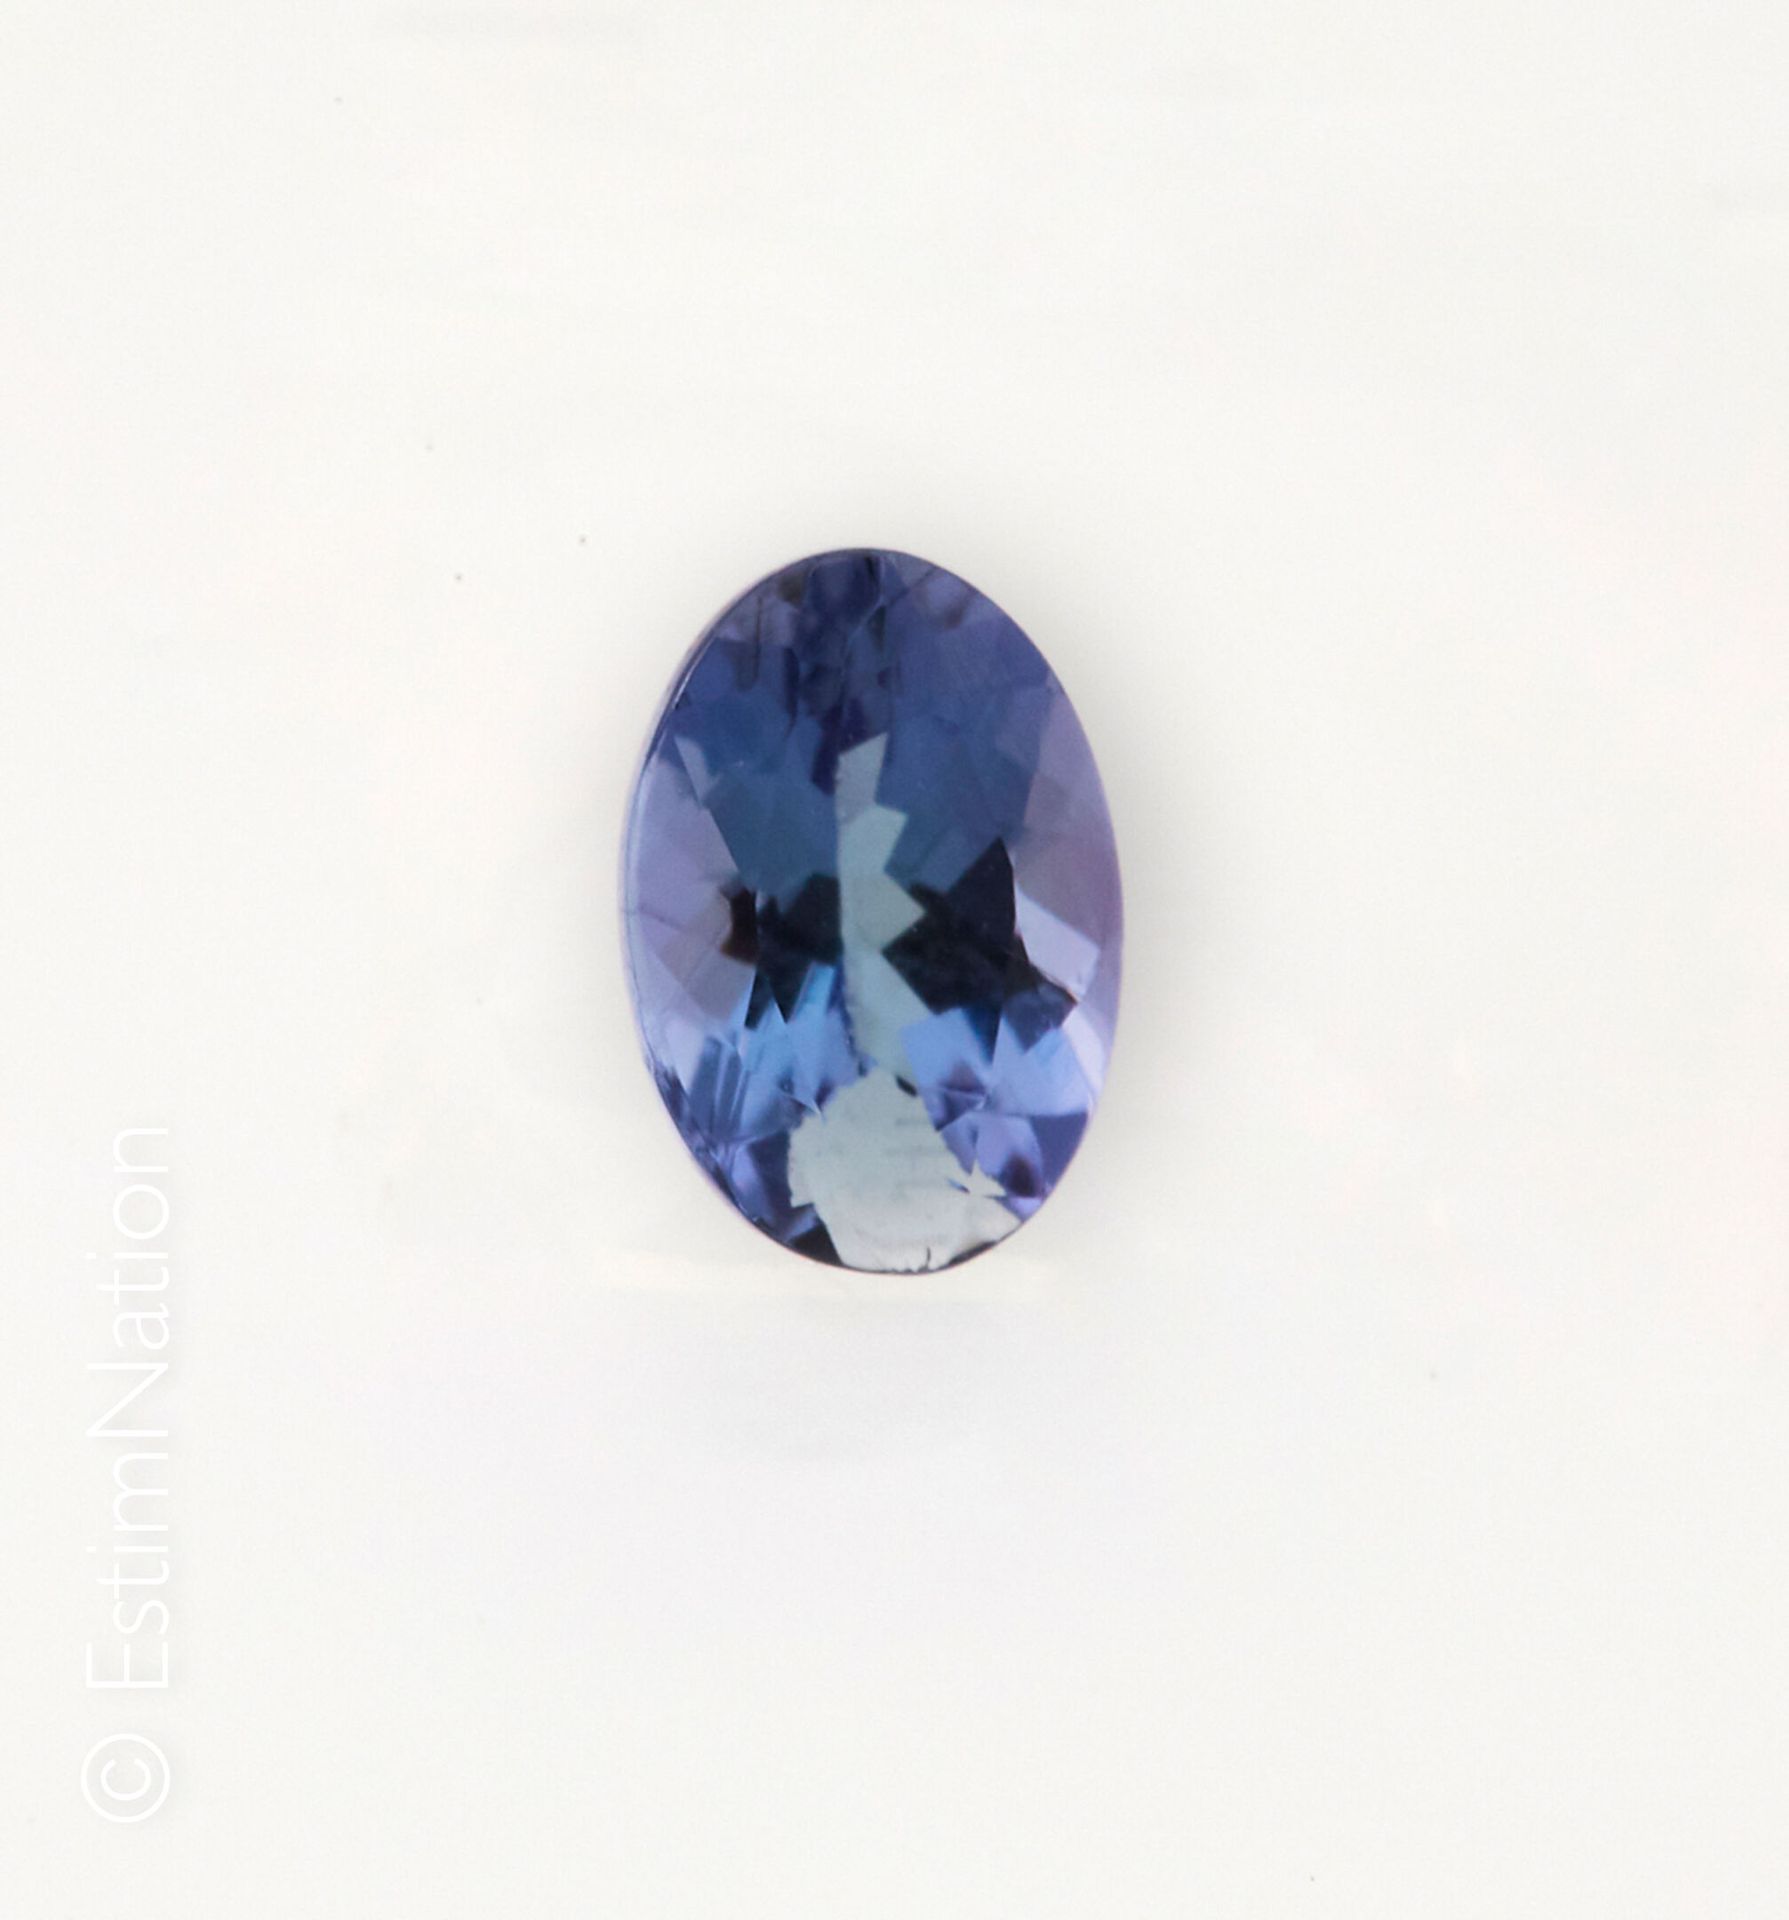 Spinelle Blue oval cut spinel weighing 0.54 ct. Dimensions: 5.78 x 4 mm.